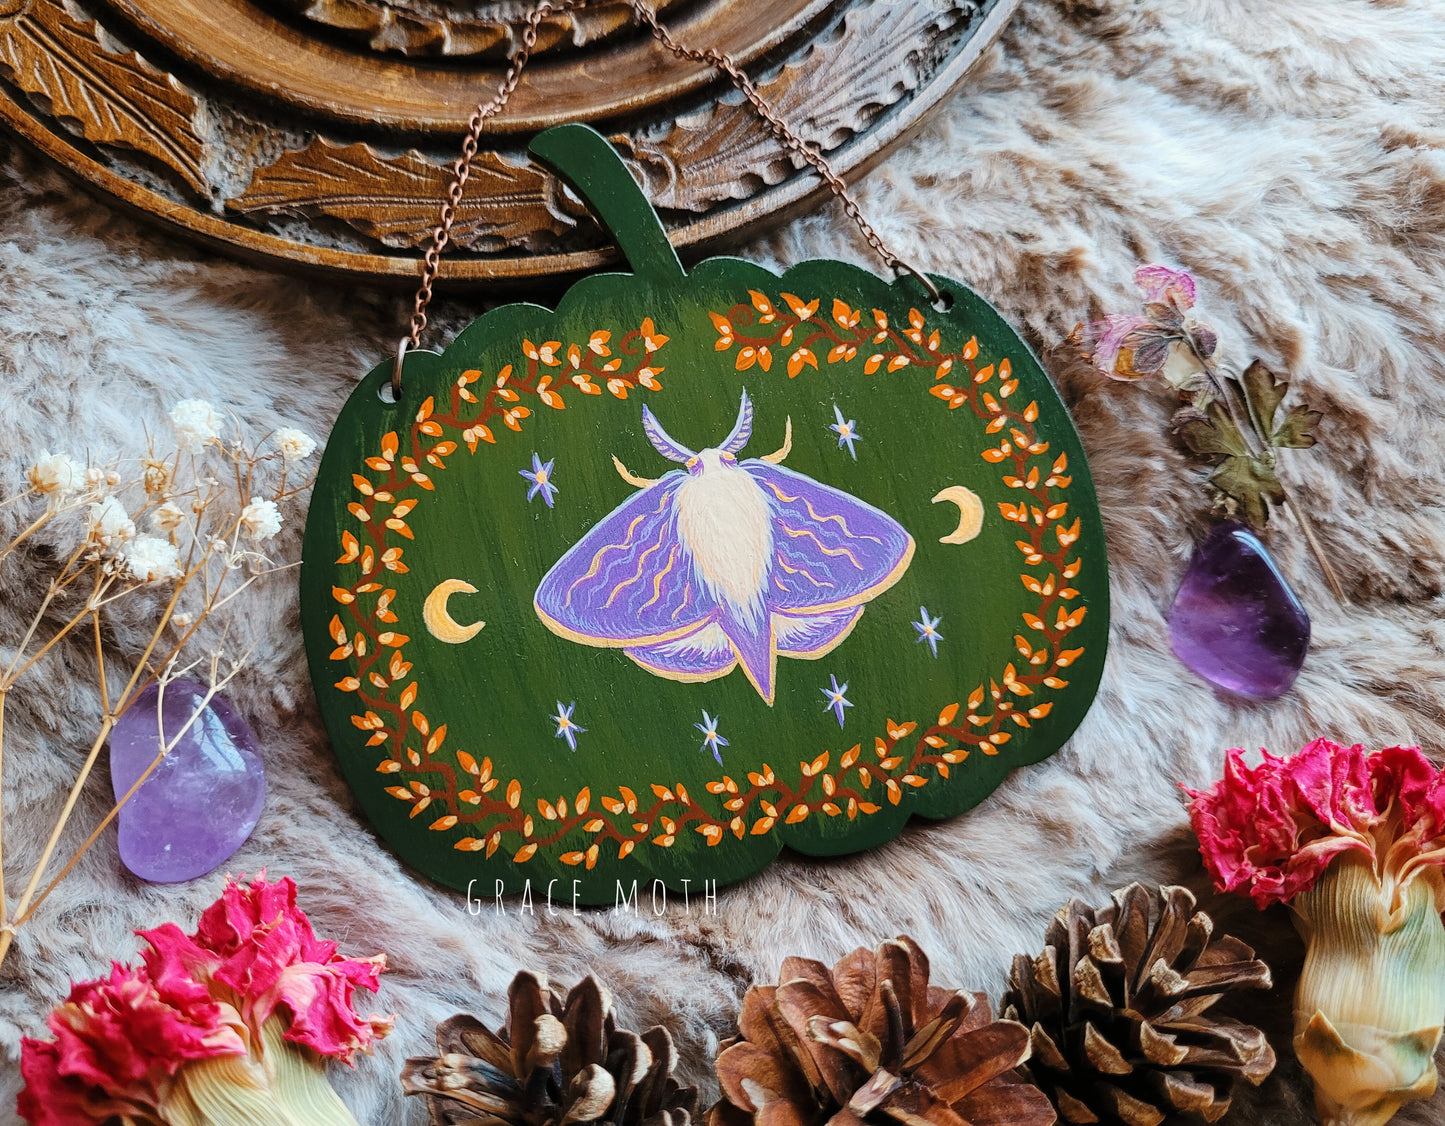 Original painted Magical Moth on Pumpkin - One of a kind handmade wall hanging/ornament by Grace Moth